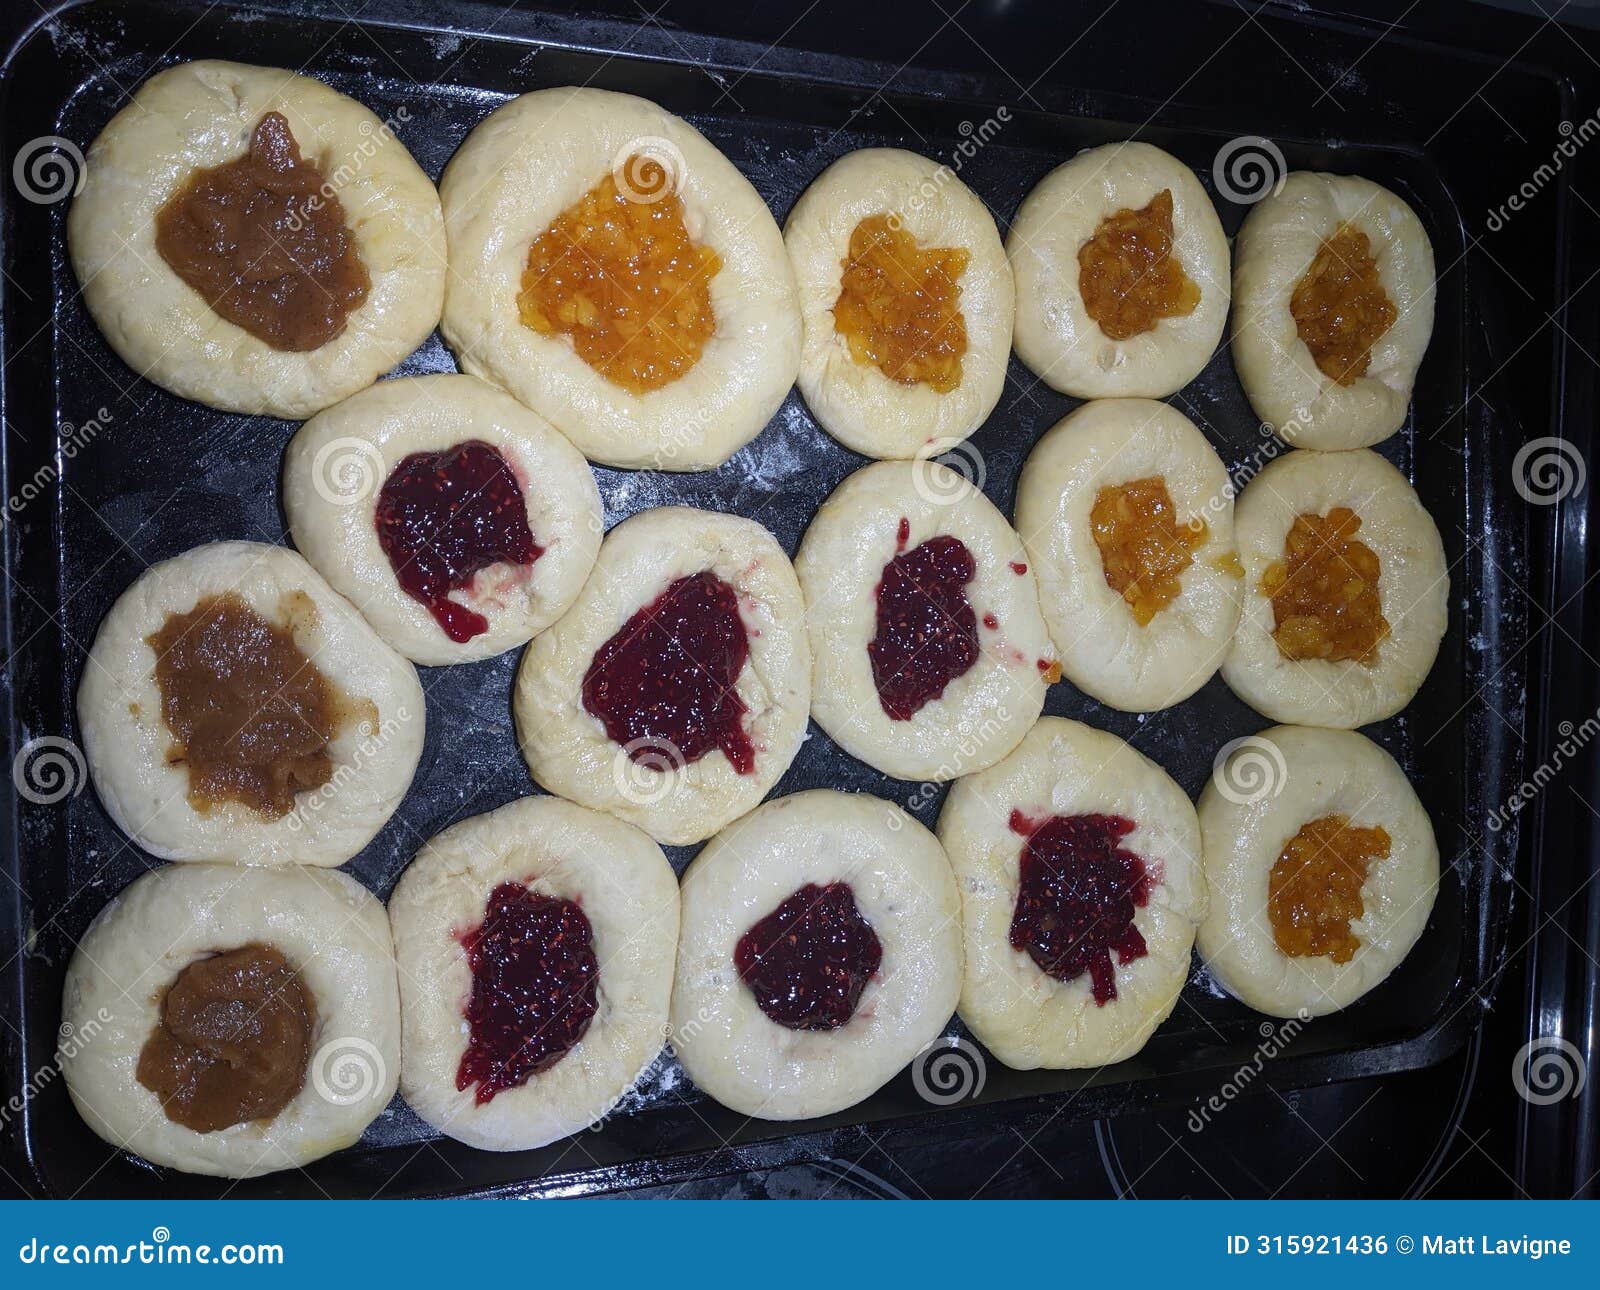 homemade jam filled raw kolachi pastry proofing on a baking pan